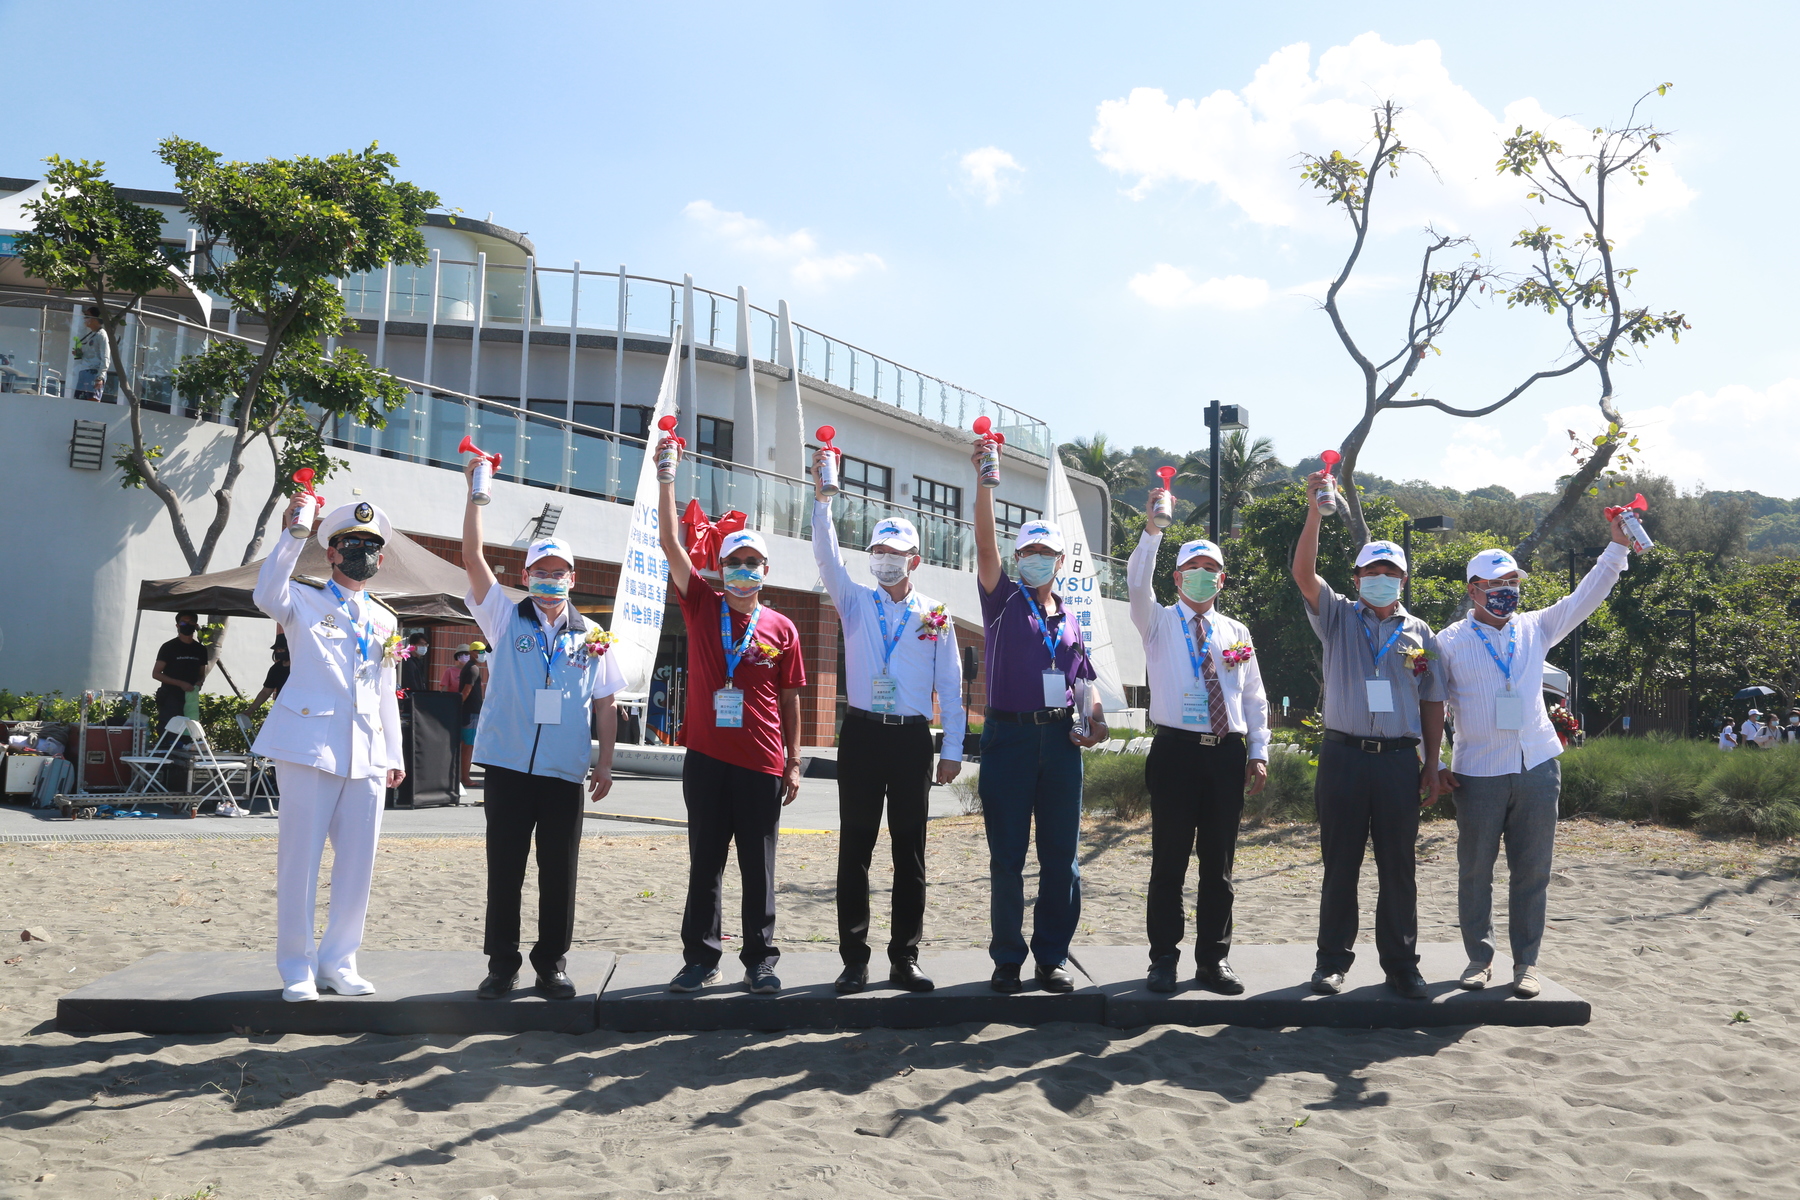 The special guests of the ceremony sounded the horn to announce the start of the 2021 Taiwan Cup National Sailing Championship.